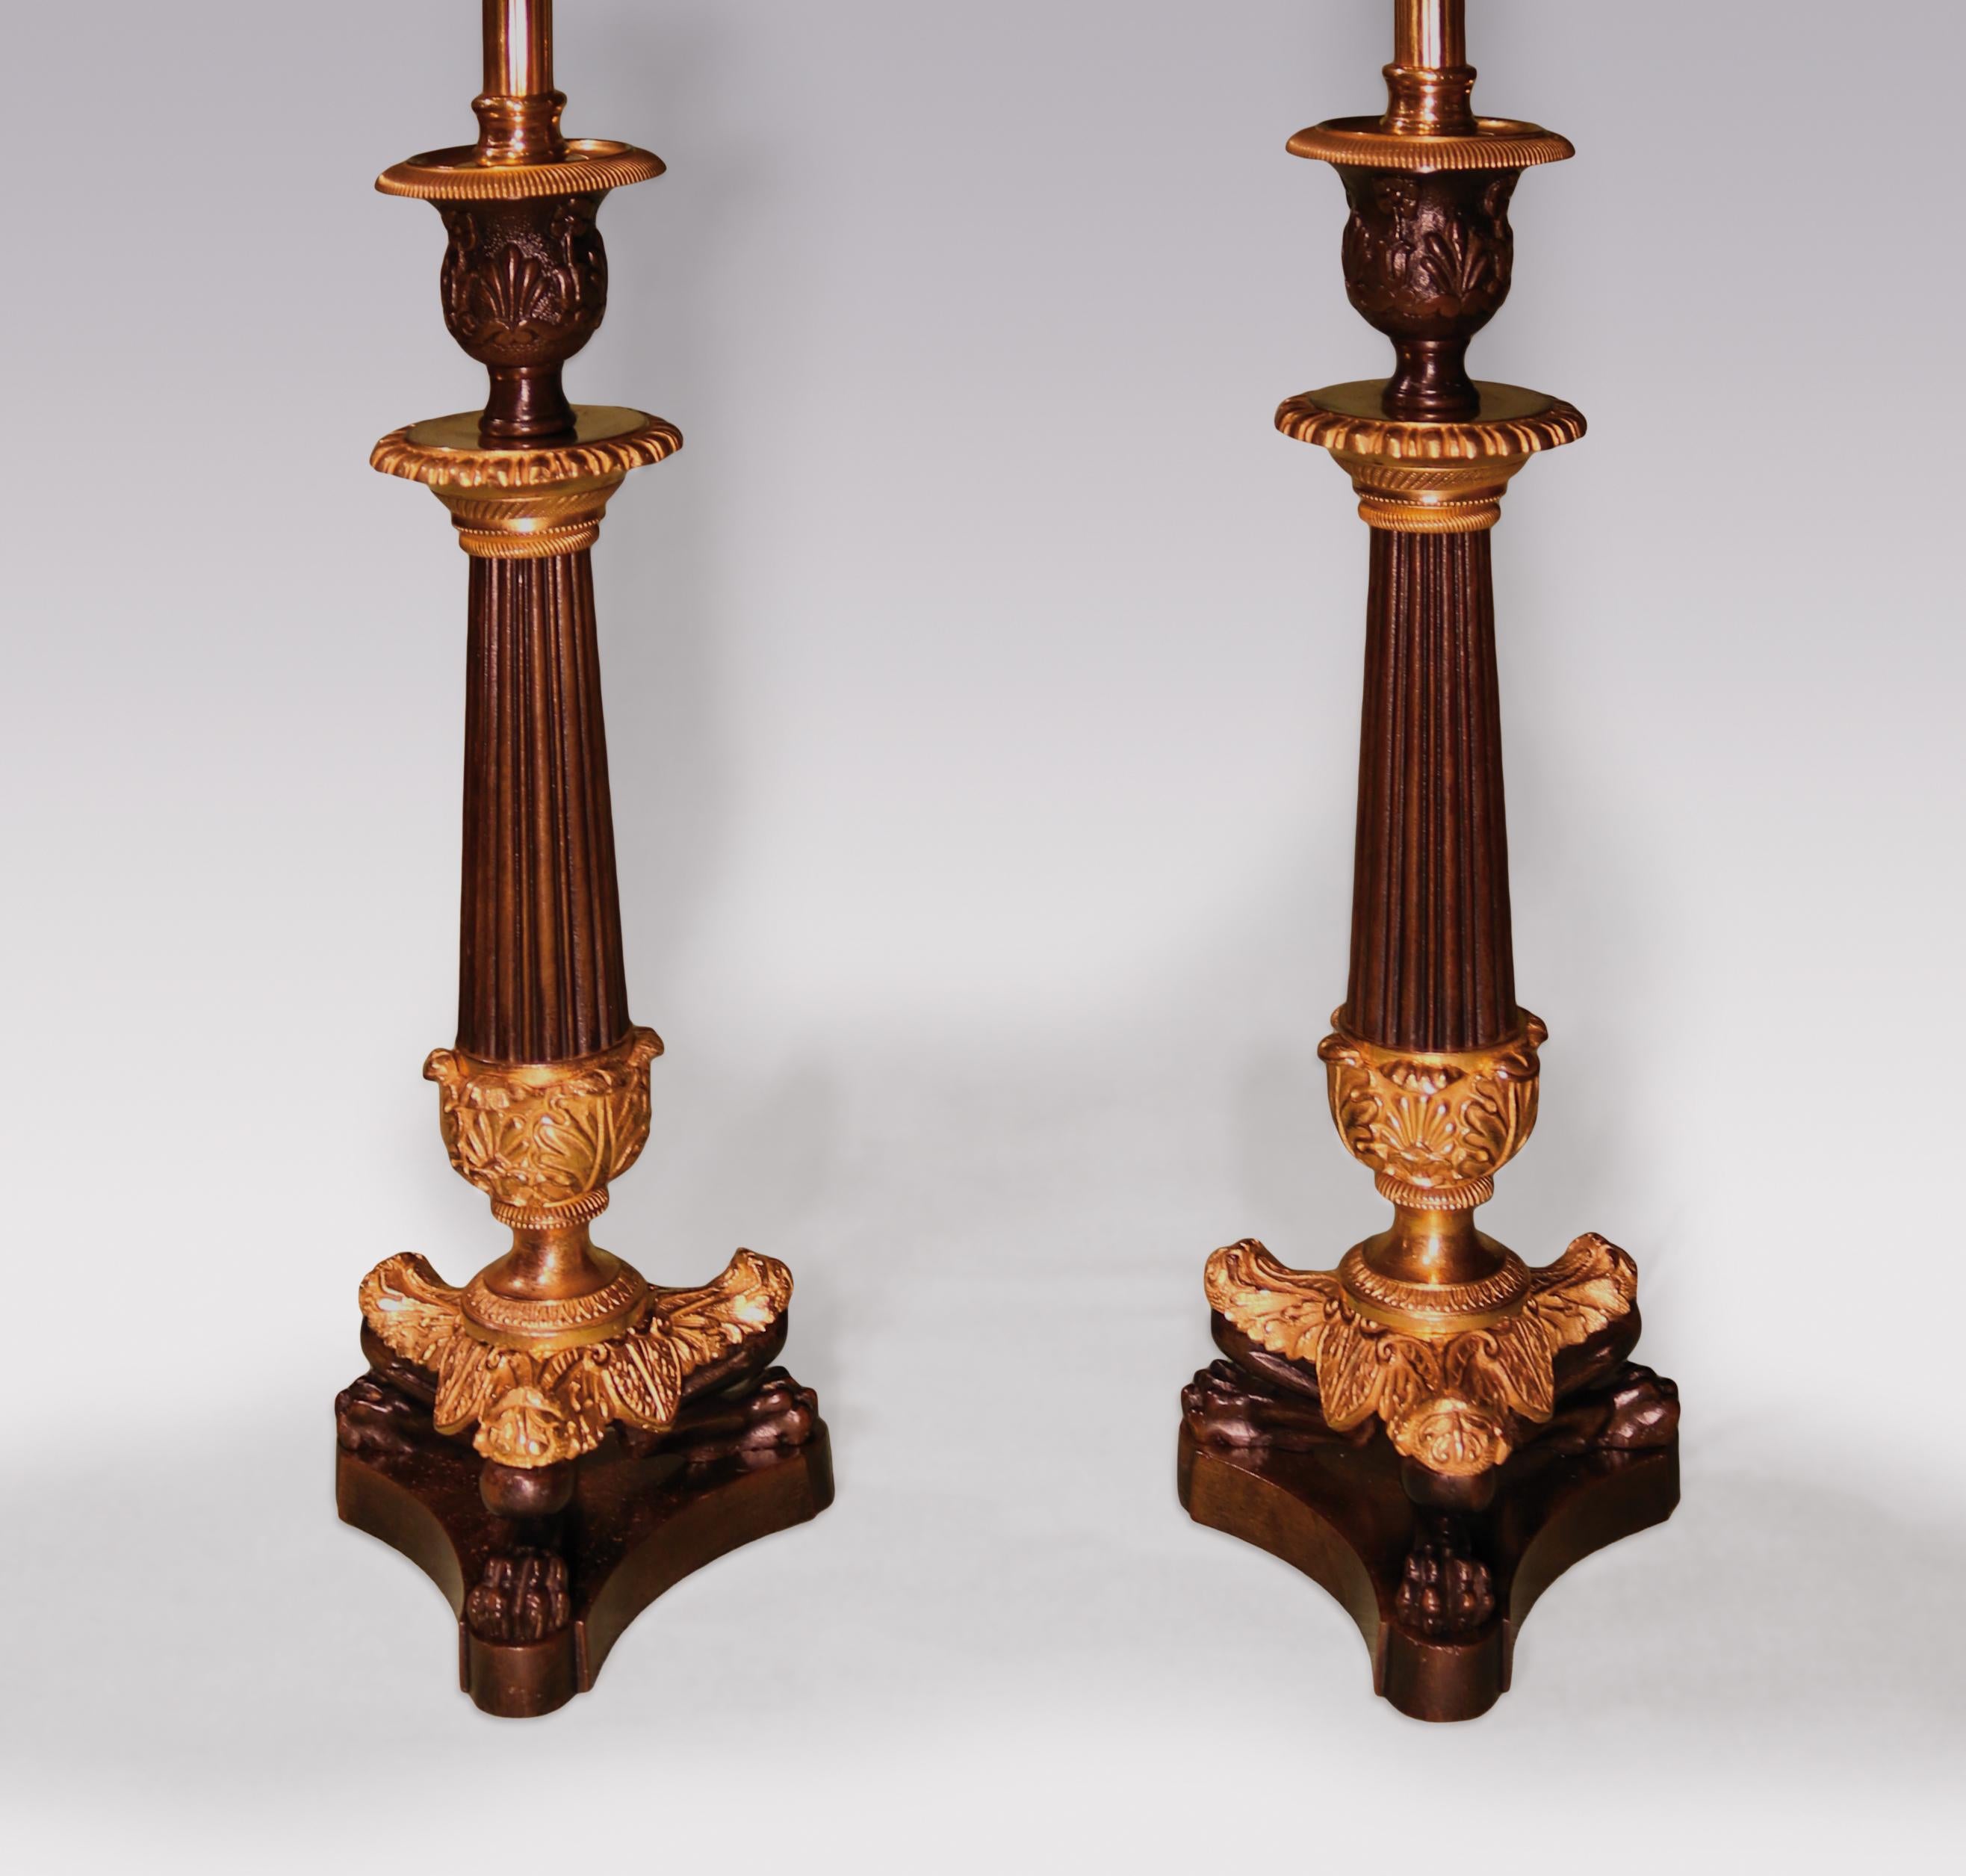 A pair of mid-19th century bronze and ormolu candlesticks, having urn-shaped sconces above floral decorated collars on reeded tapering stems, supported on acanthus decorated lion's paw triangular plinths ending on concave triform bases. (Now